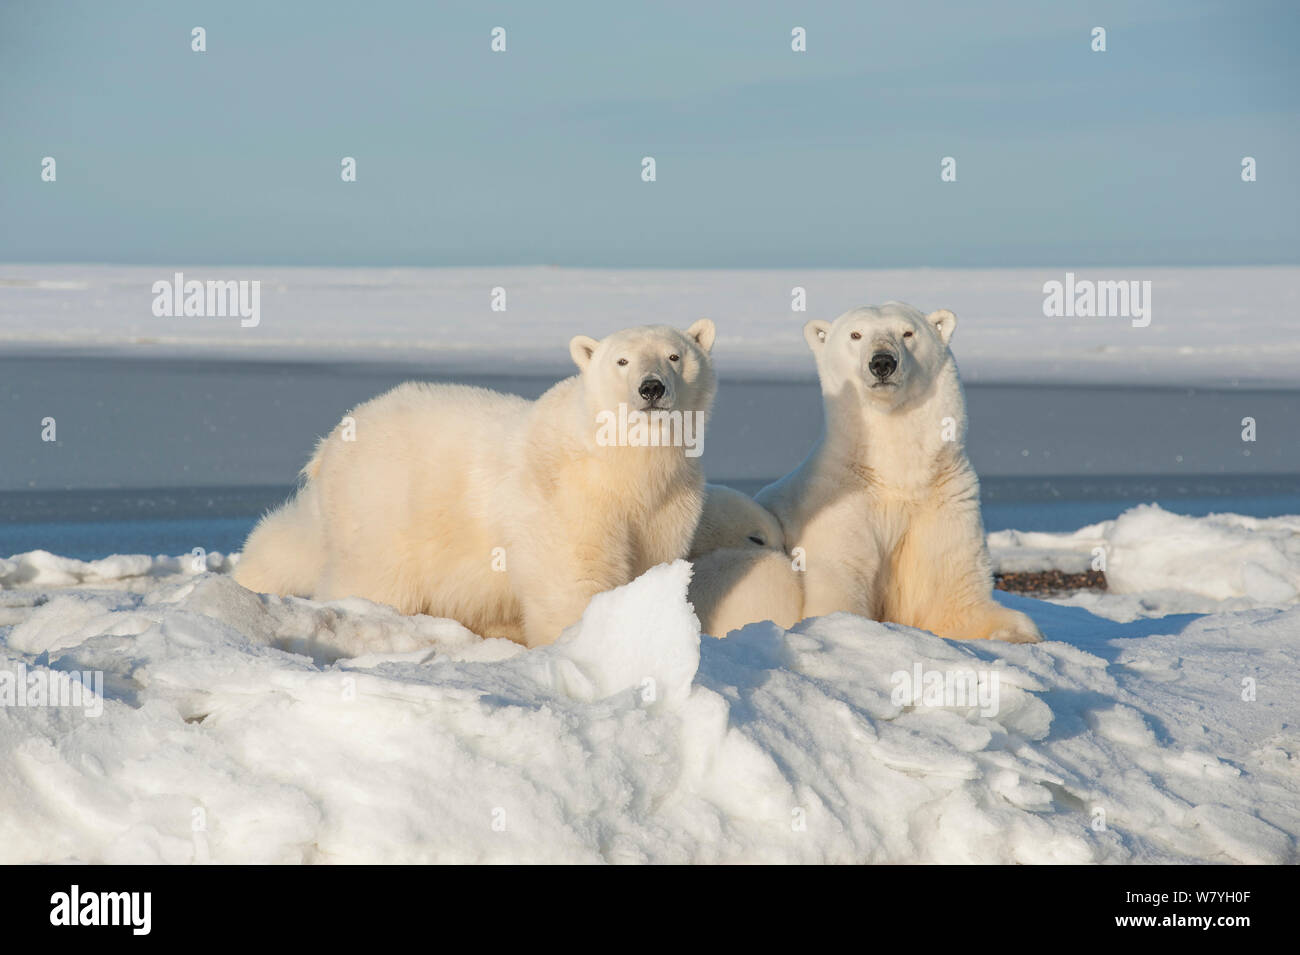 Polar bear (Ursus maritimus) sow with a two juveniles rest along newly formed pack ice during autumn freeze up, Beaufort Sea, off Arctic coast, Alaska Stock Photo